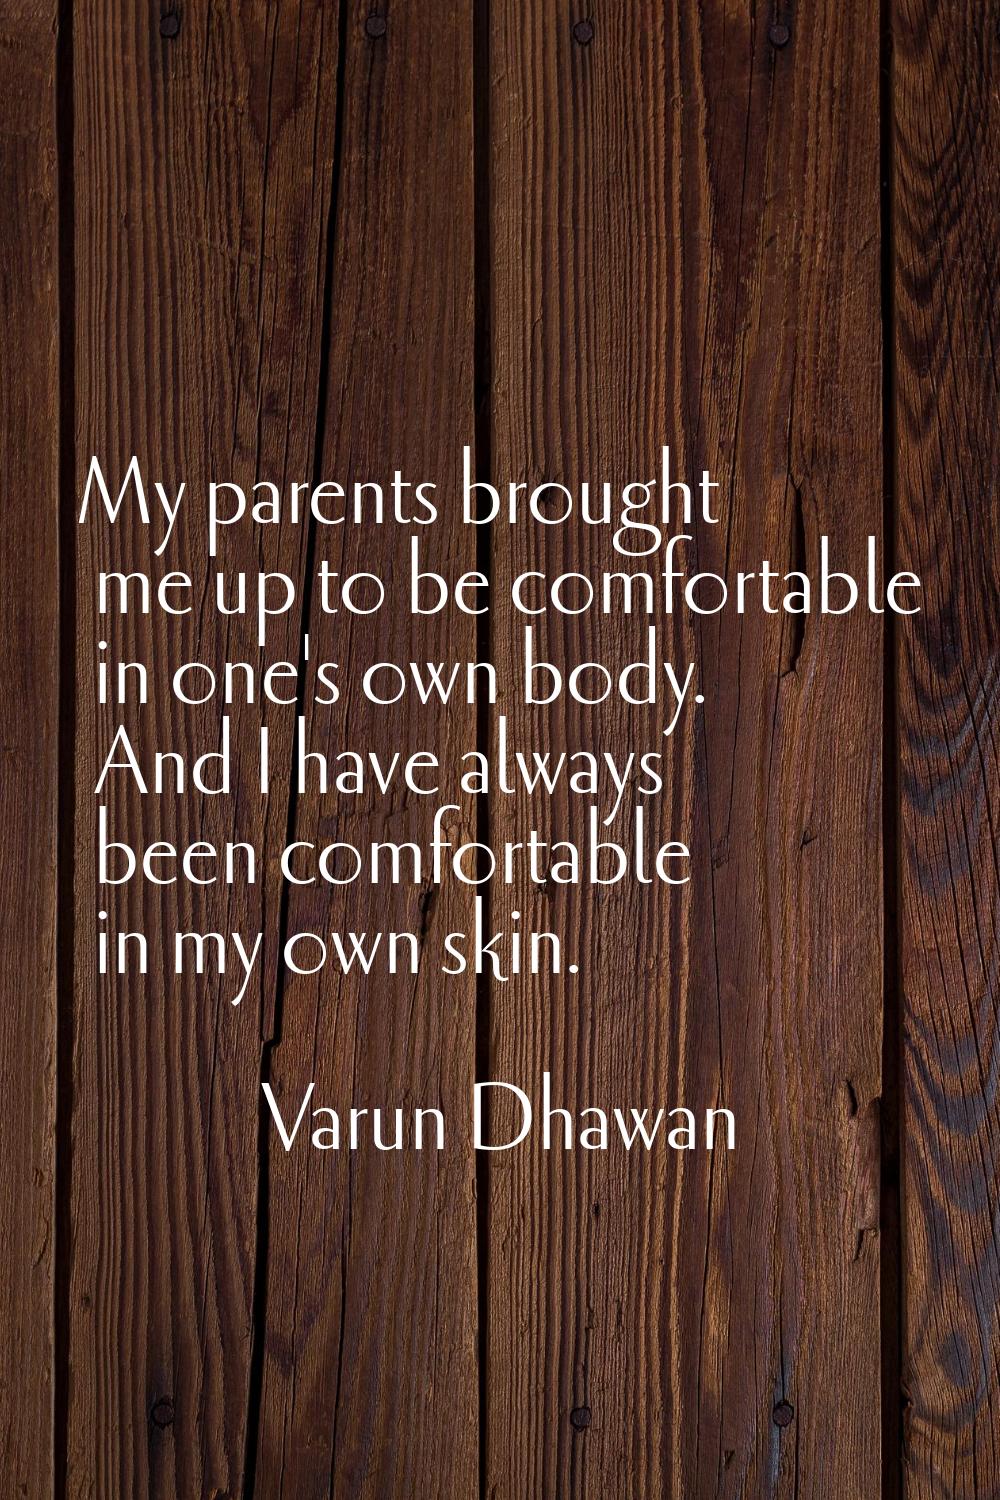 My parents brought me up to be comfortable in one's own body. And I have always been comfortable in